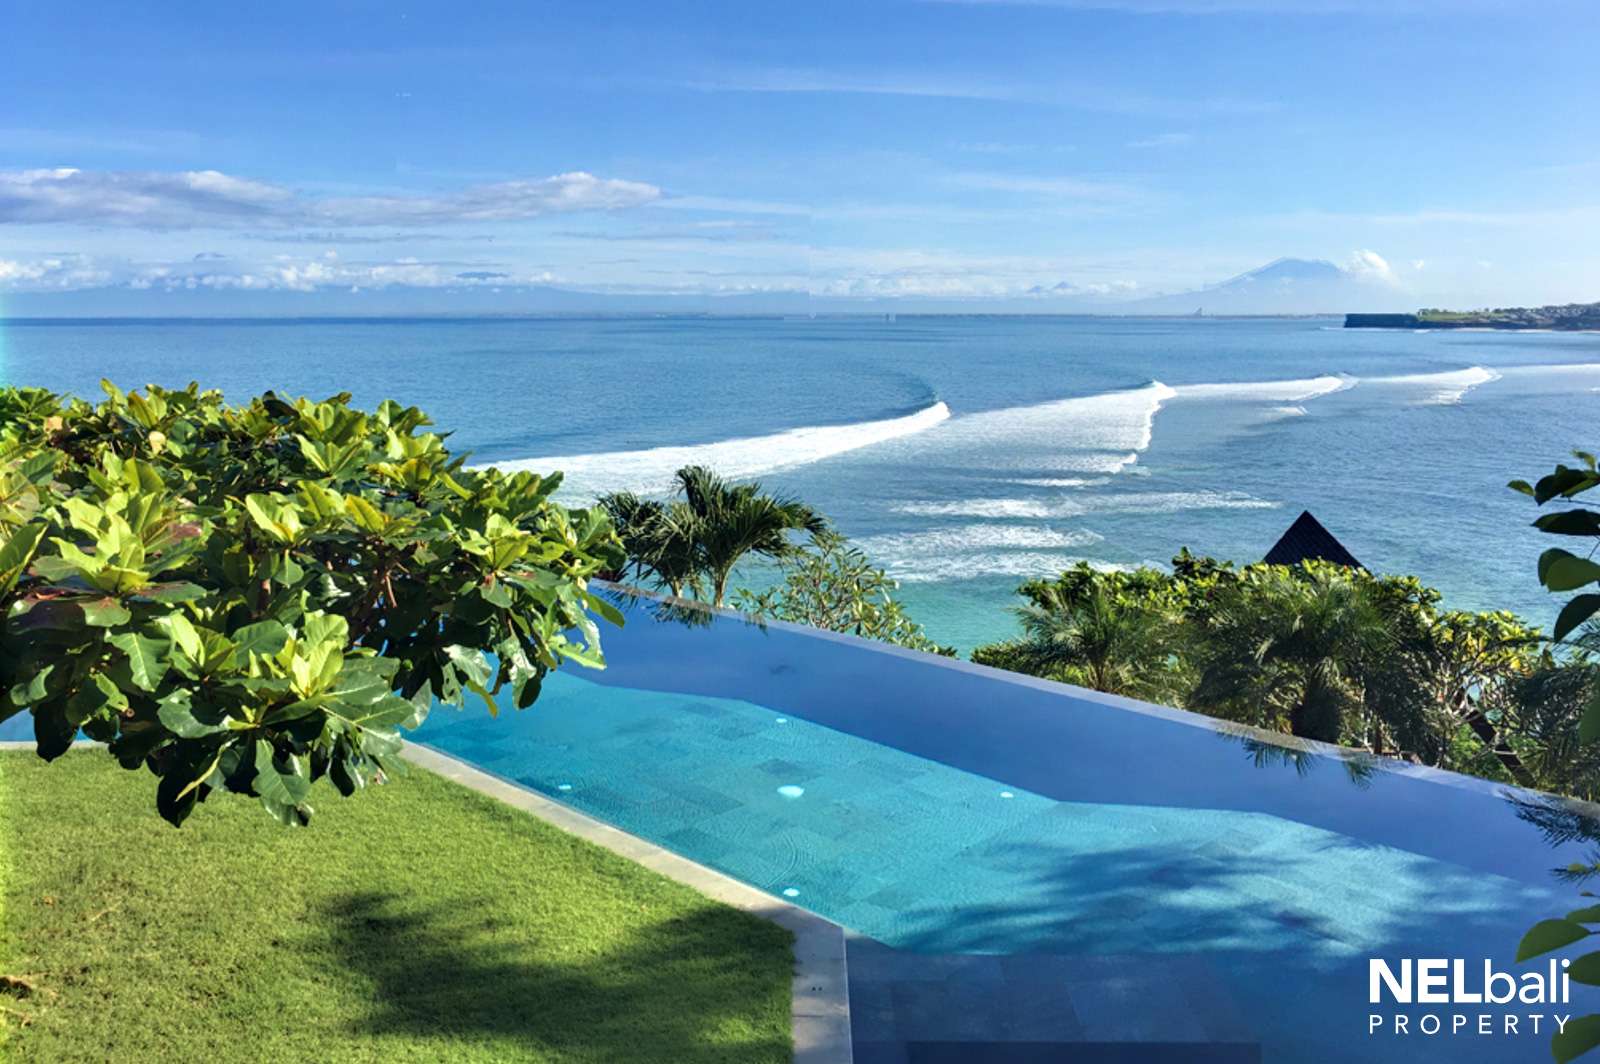 Top Bali Residence with Bali's Best Views